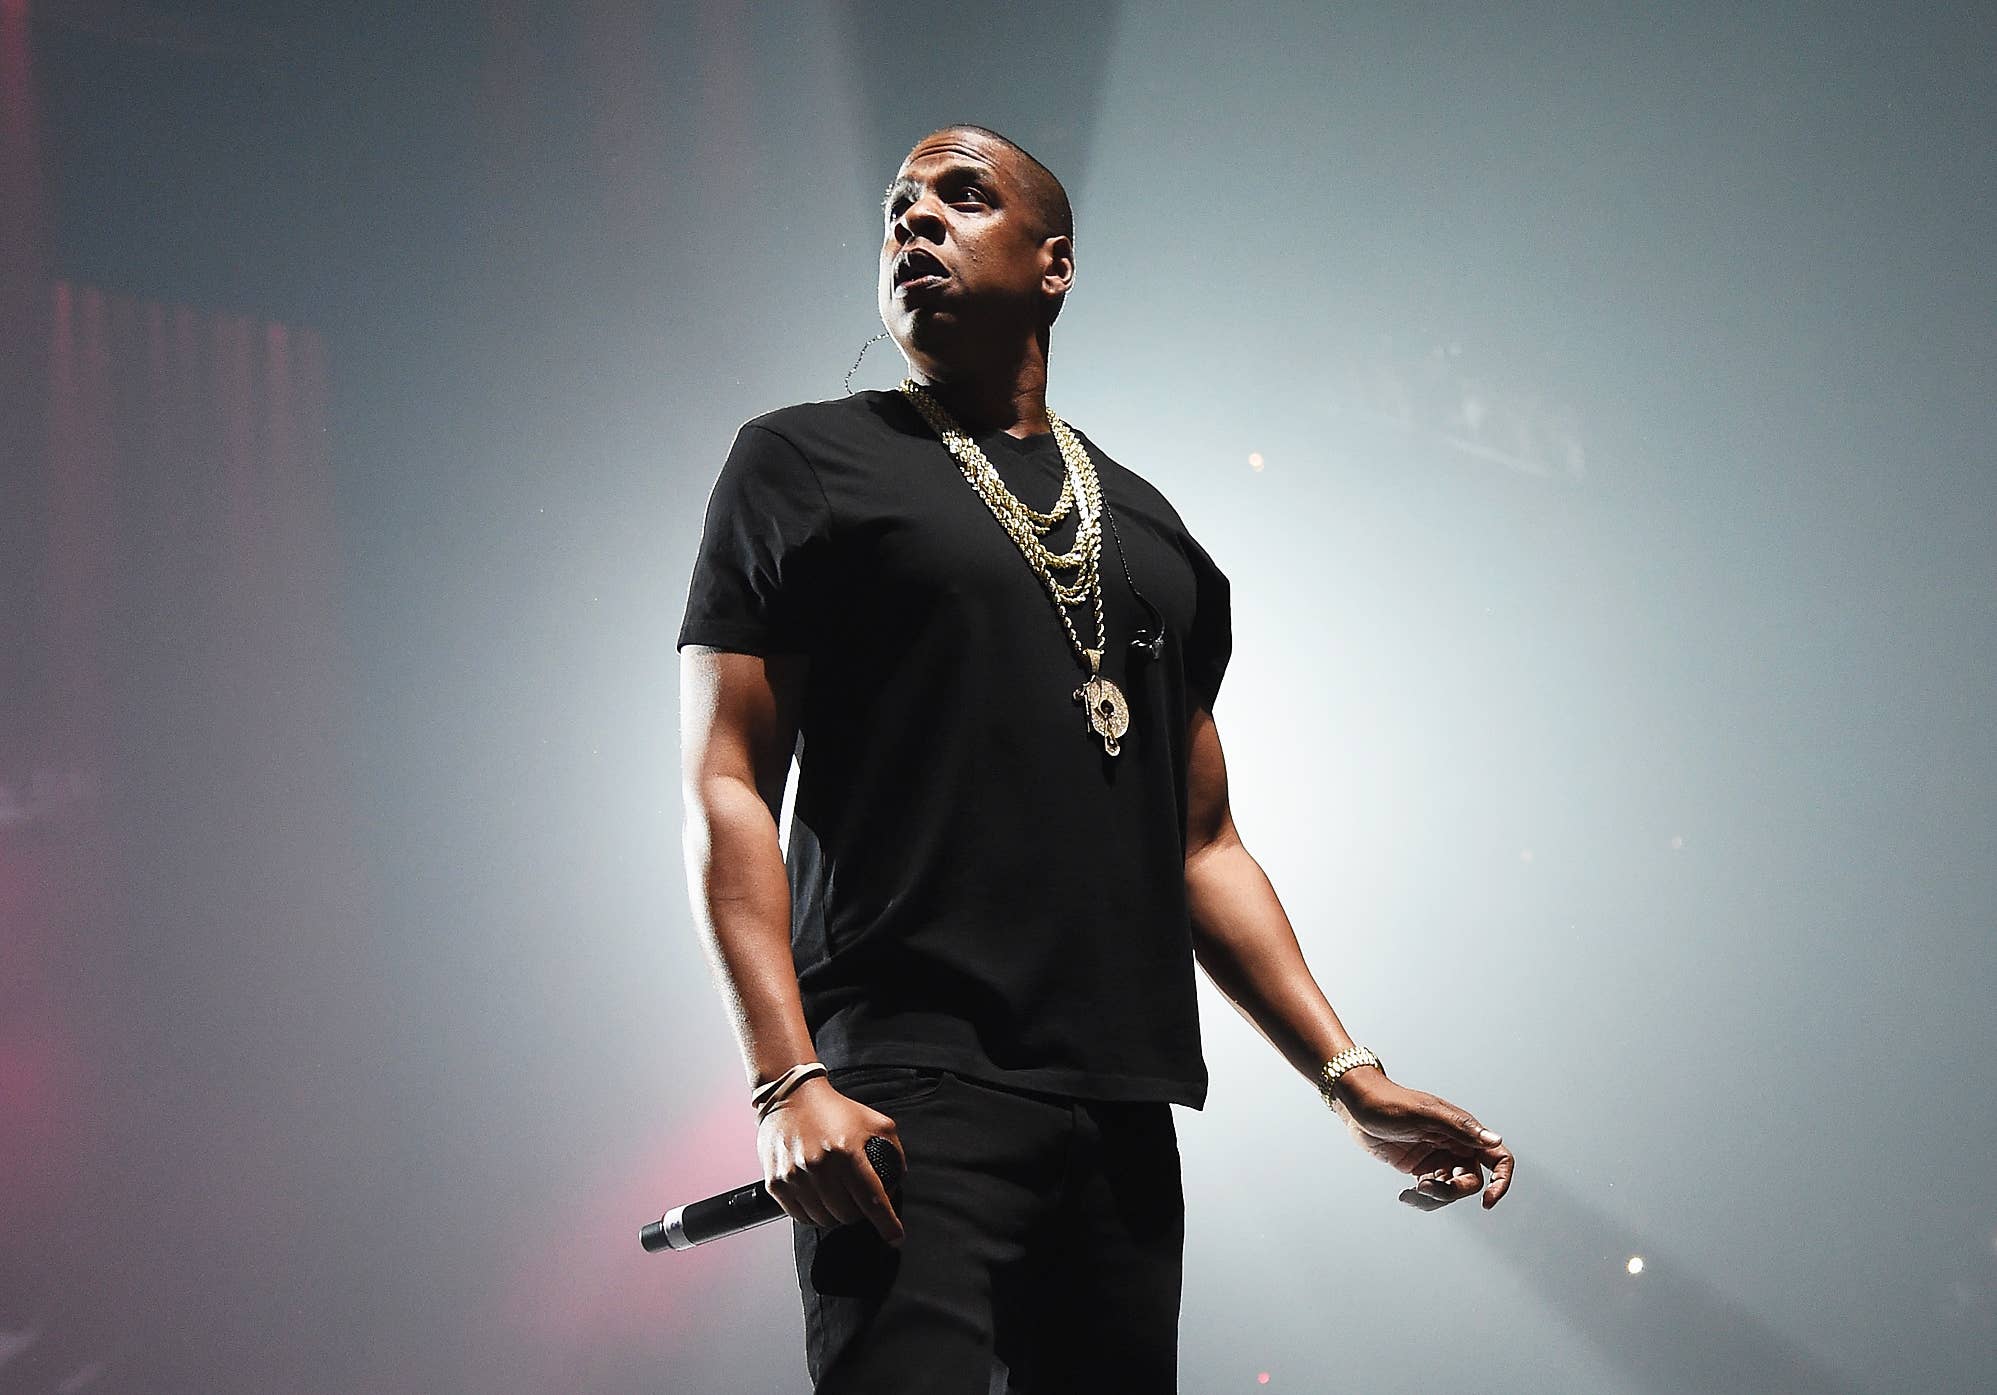 Jay-Z wearing a black shirt while holding a mic